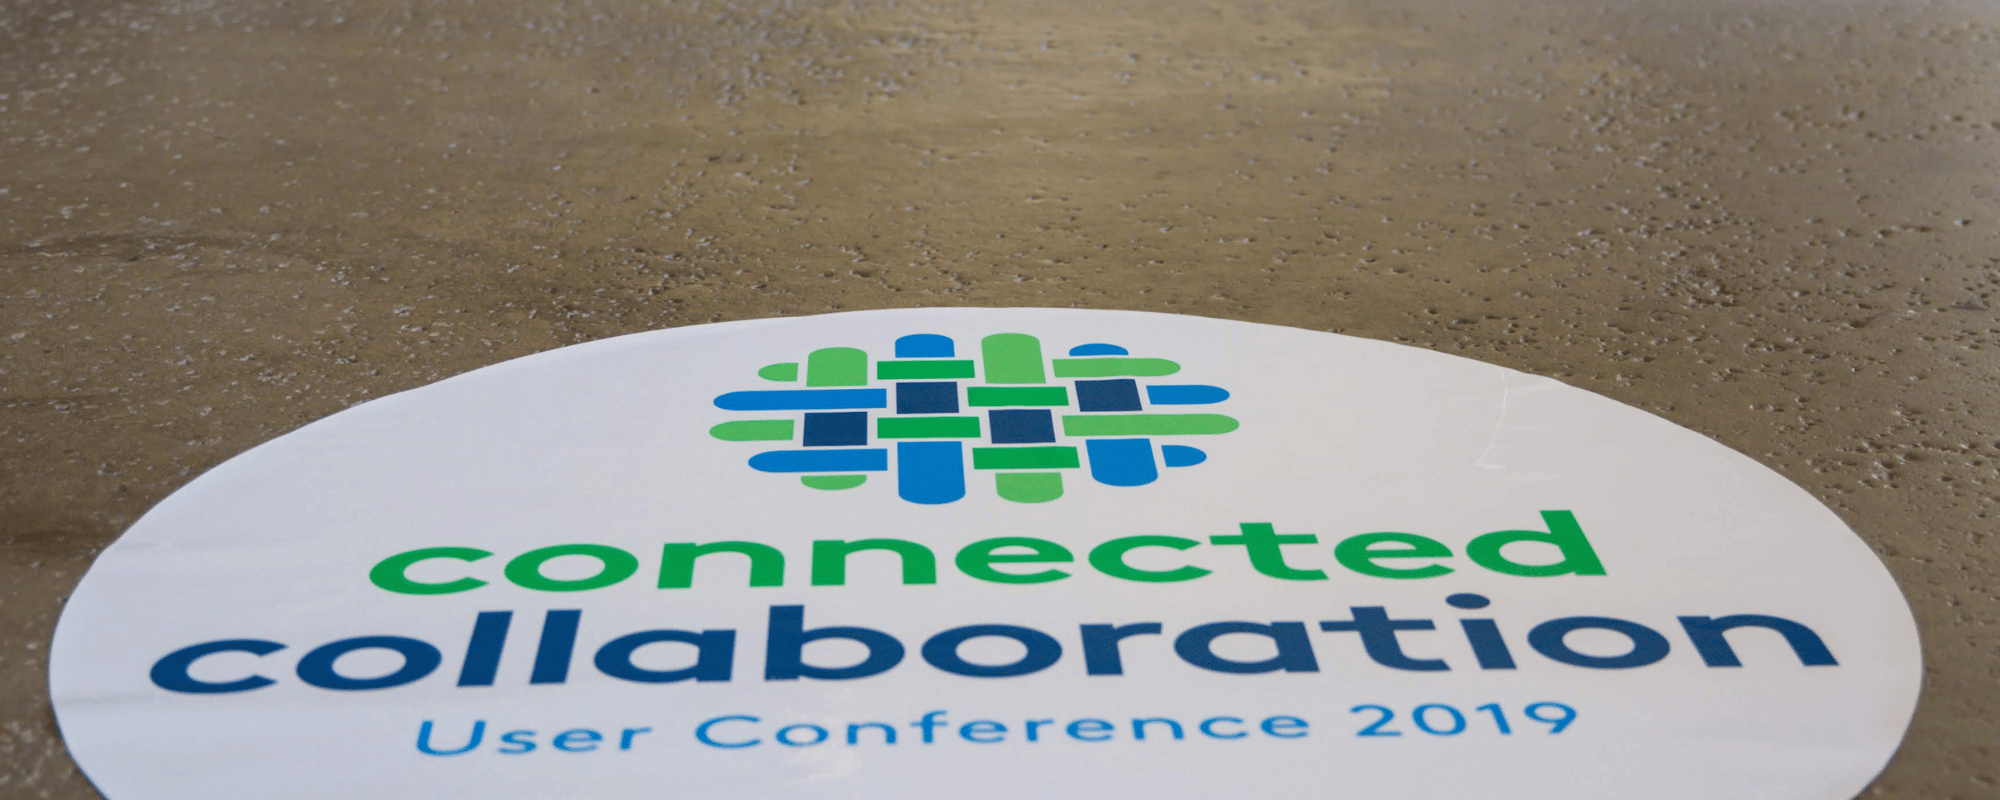 floor sticker showing event branding for a user conference in 2019